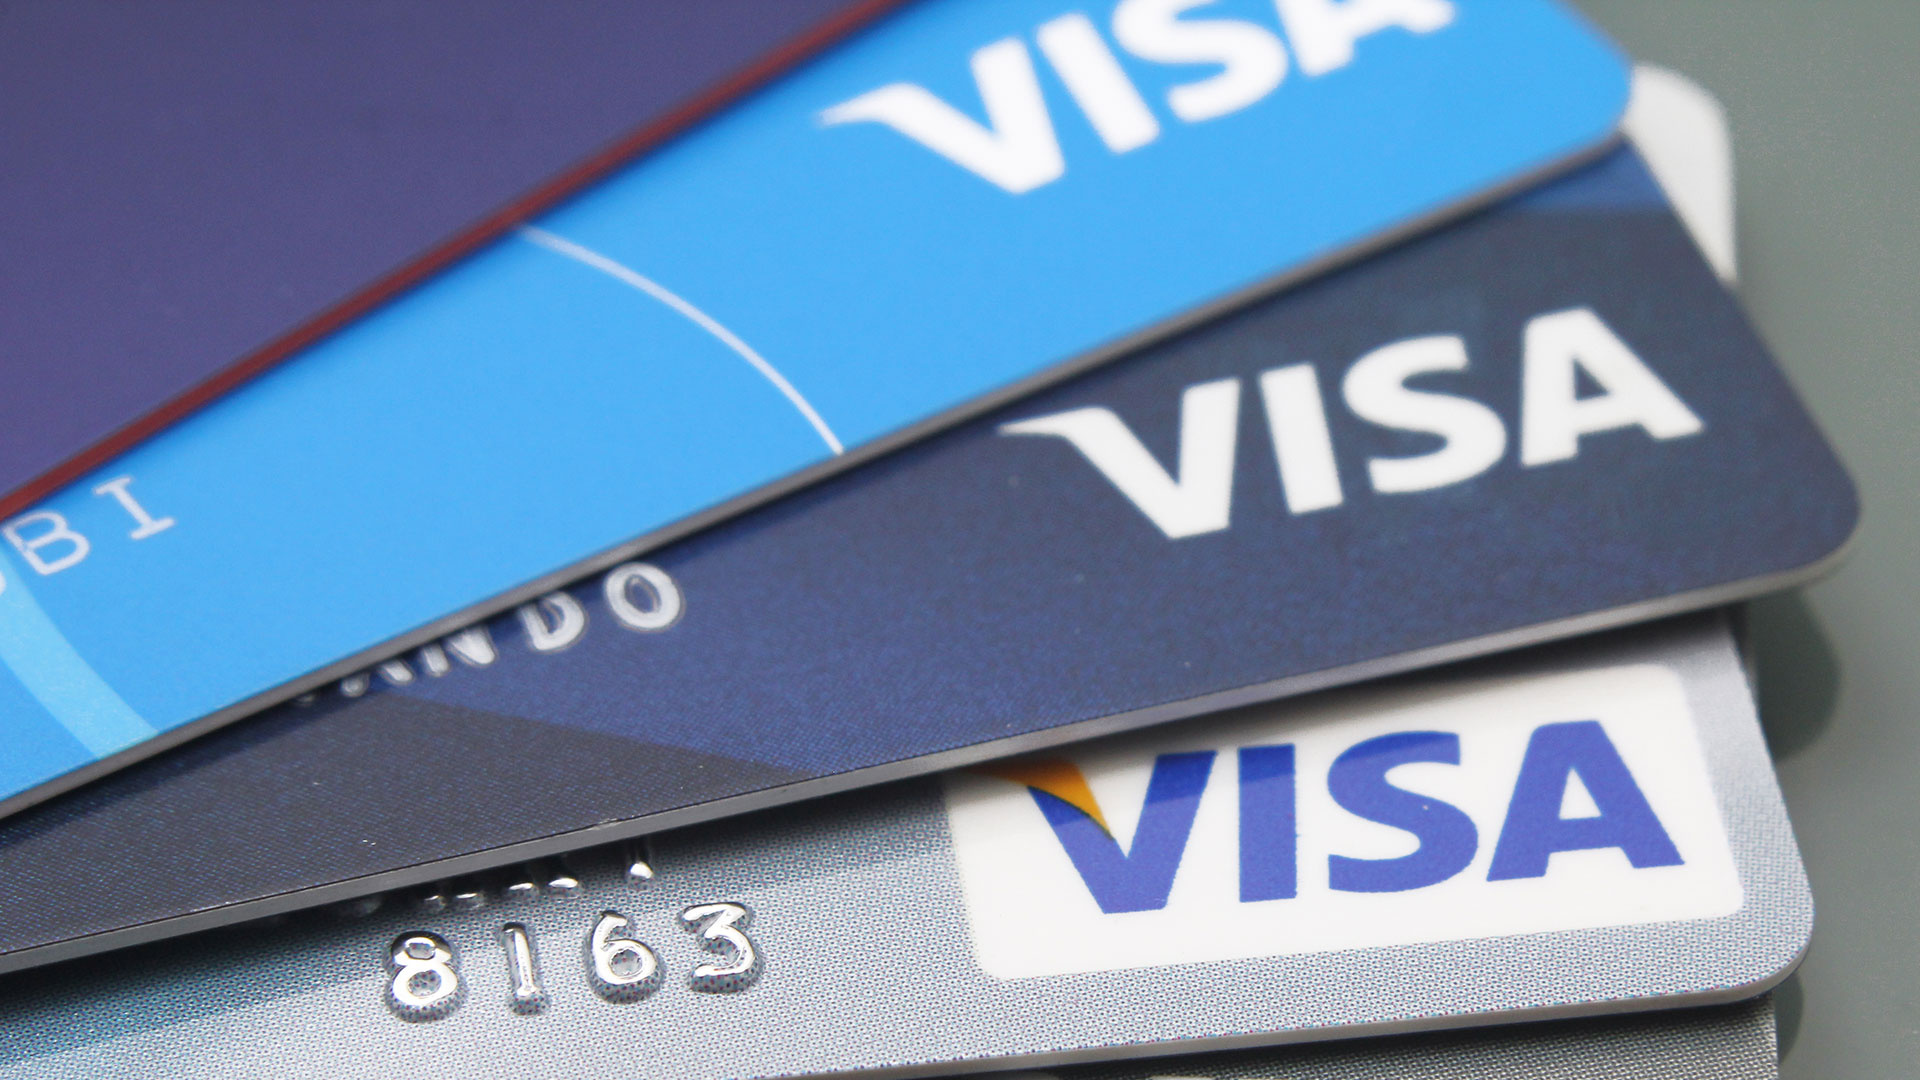 Visa (Card): Originally launched in the United States in 1958 as BankAmericard. 1920x1080 Full HD Background.